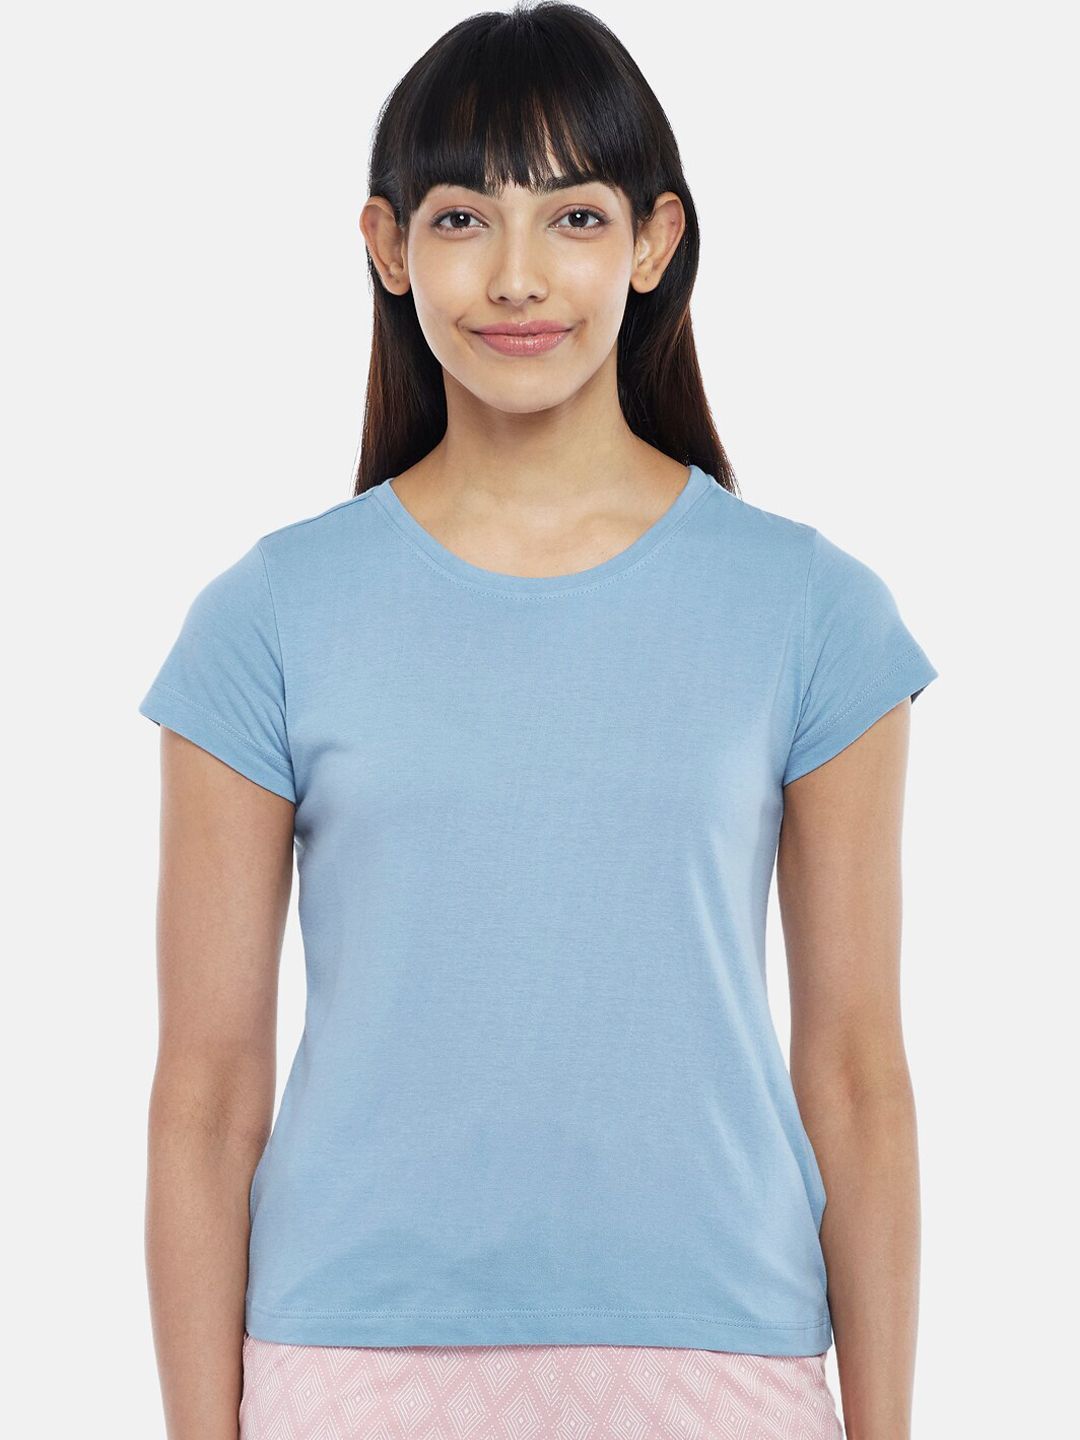 Dreamz by Pantaloons Women Blue Solid Cotton Lounge T-shirt Price in India